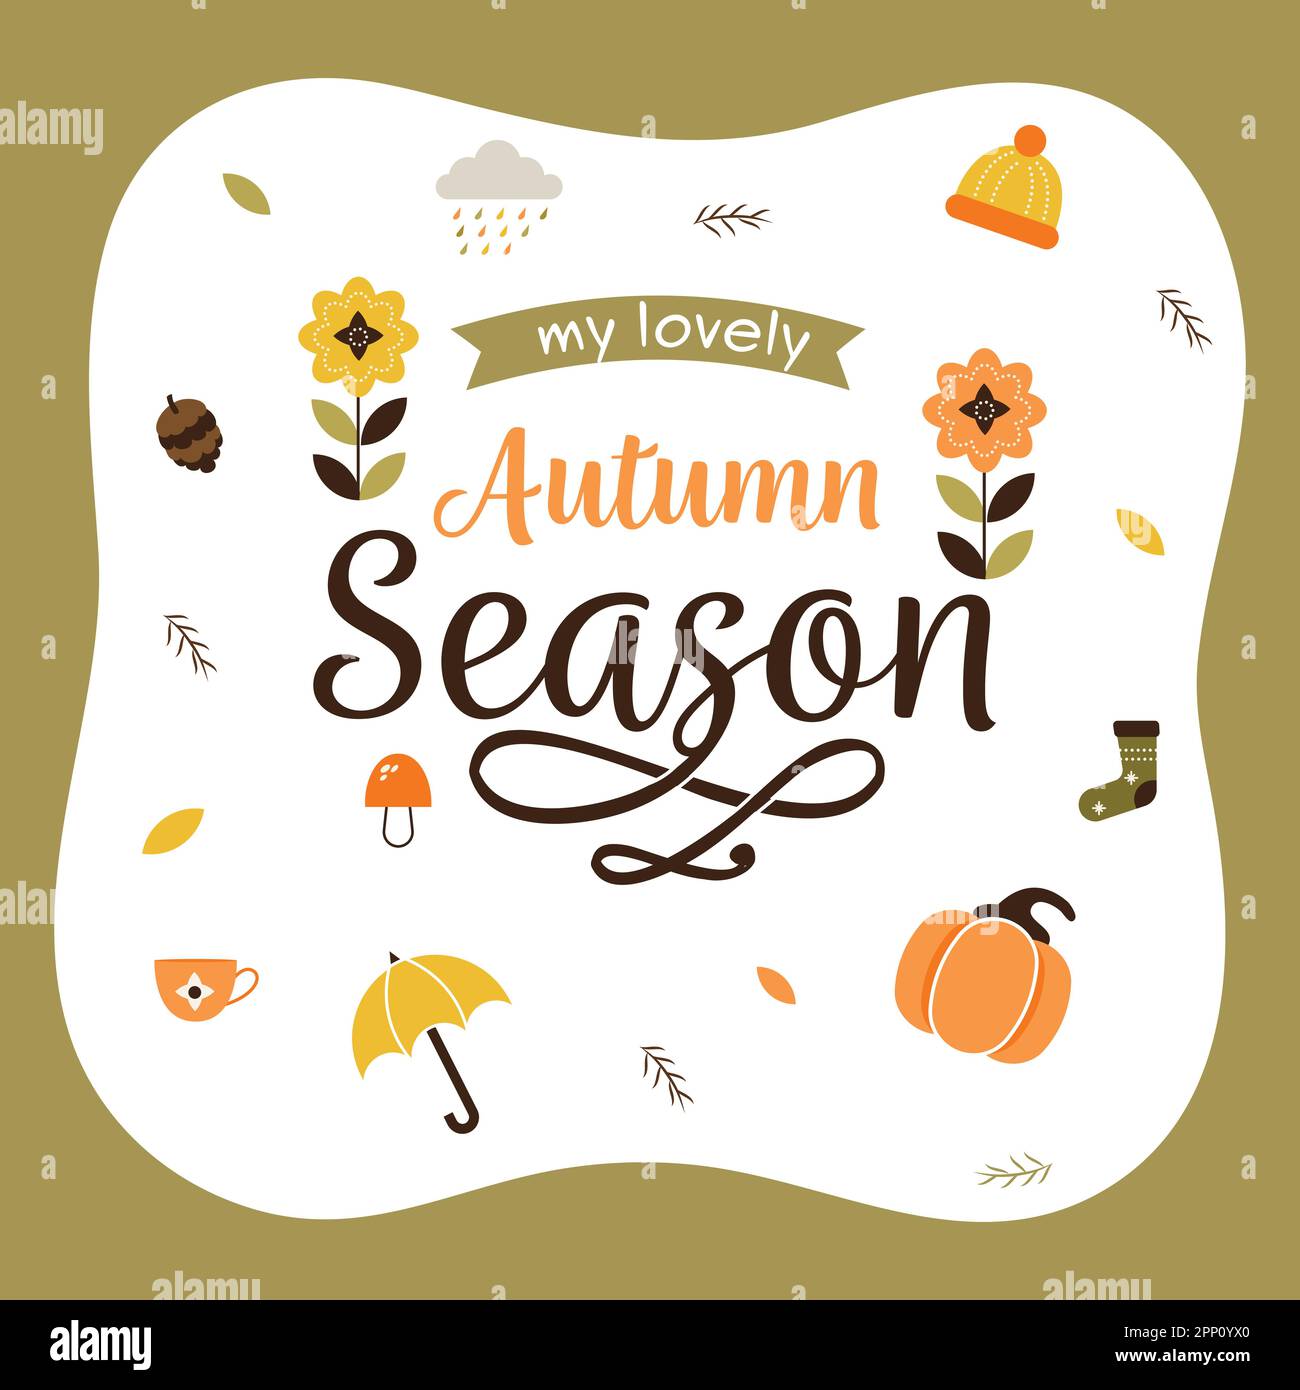 My Lovely Autumn Season Lettering With Autumnal Icons Decorated On White And Olive Green Background. Stock Vector